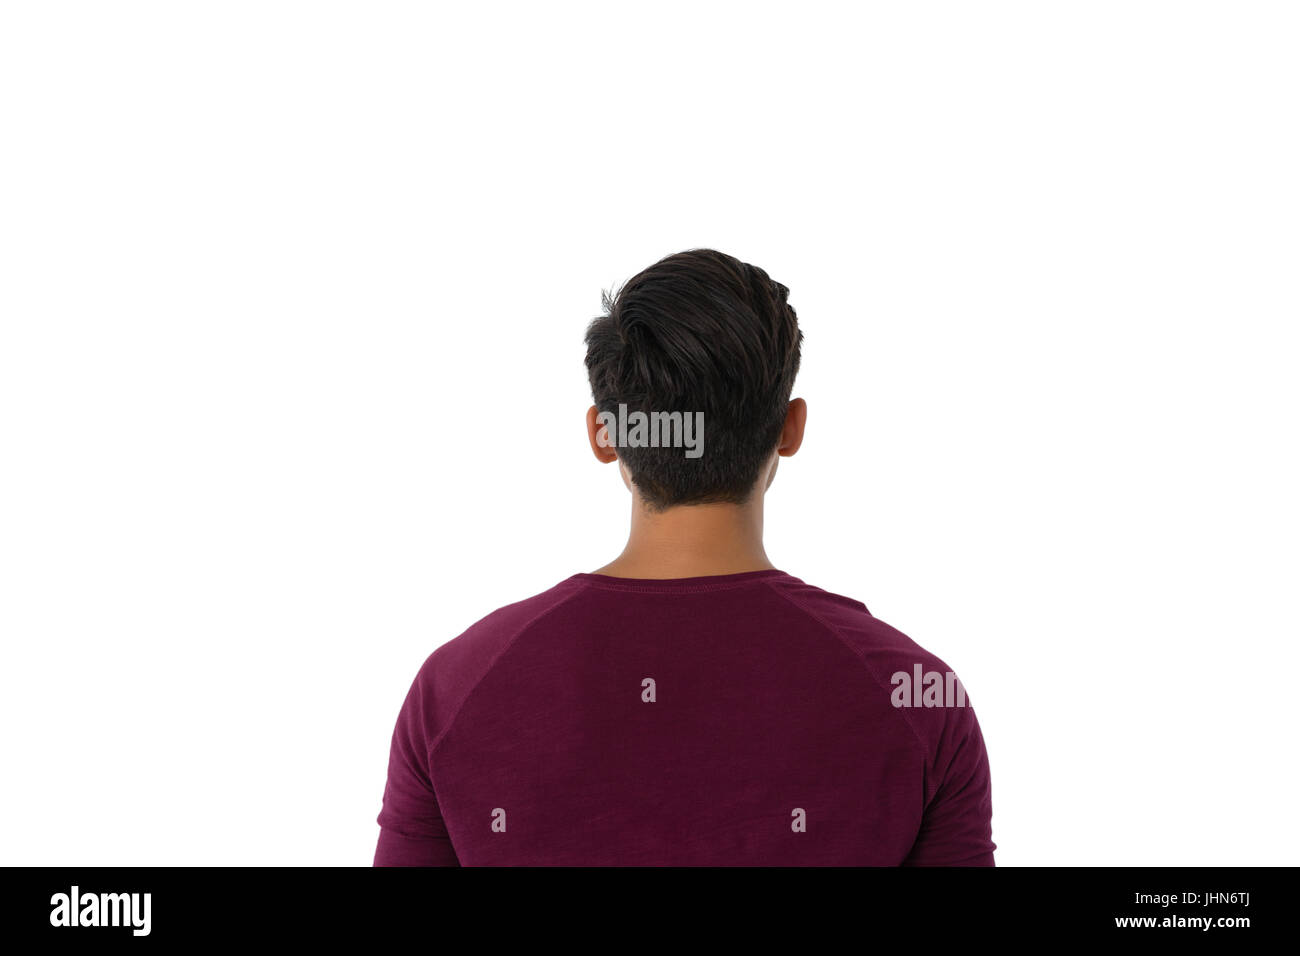 Rear view of man standing against white background Stock Photo - Alamy